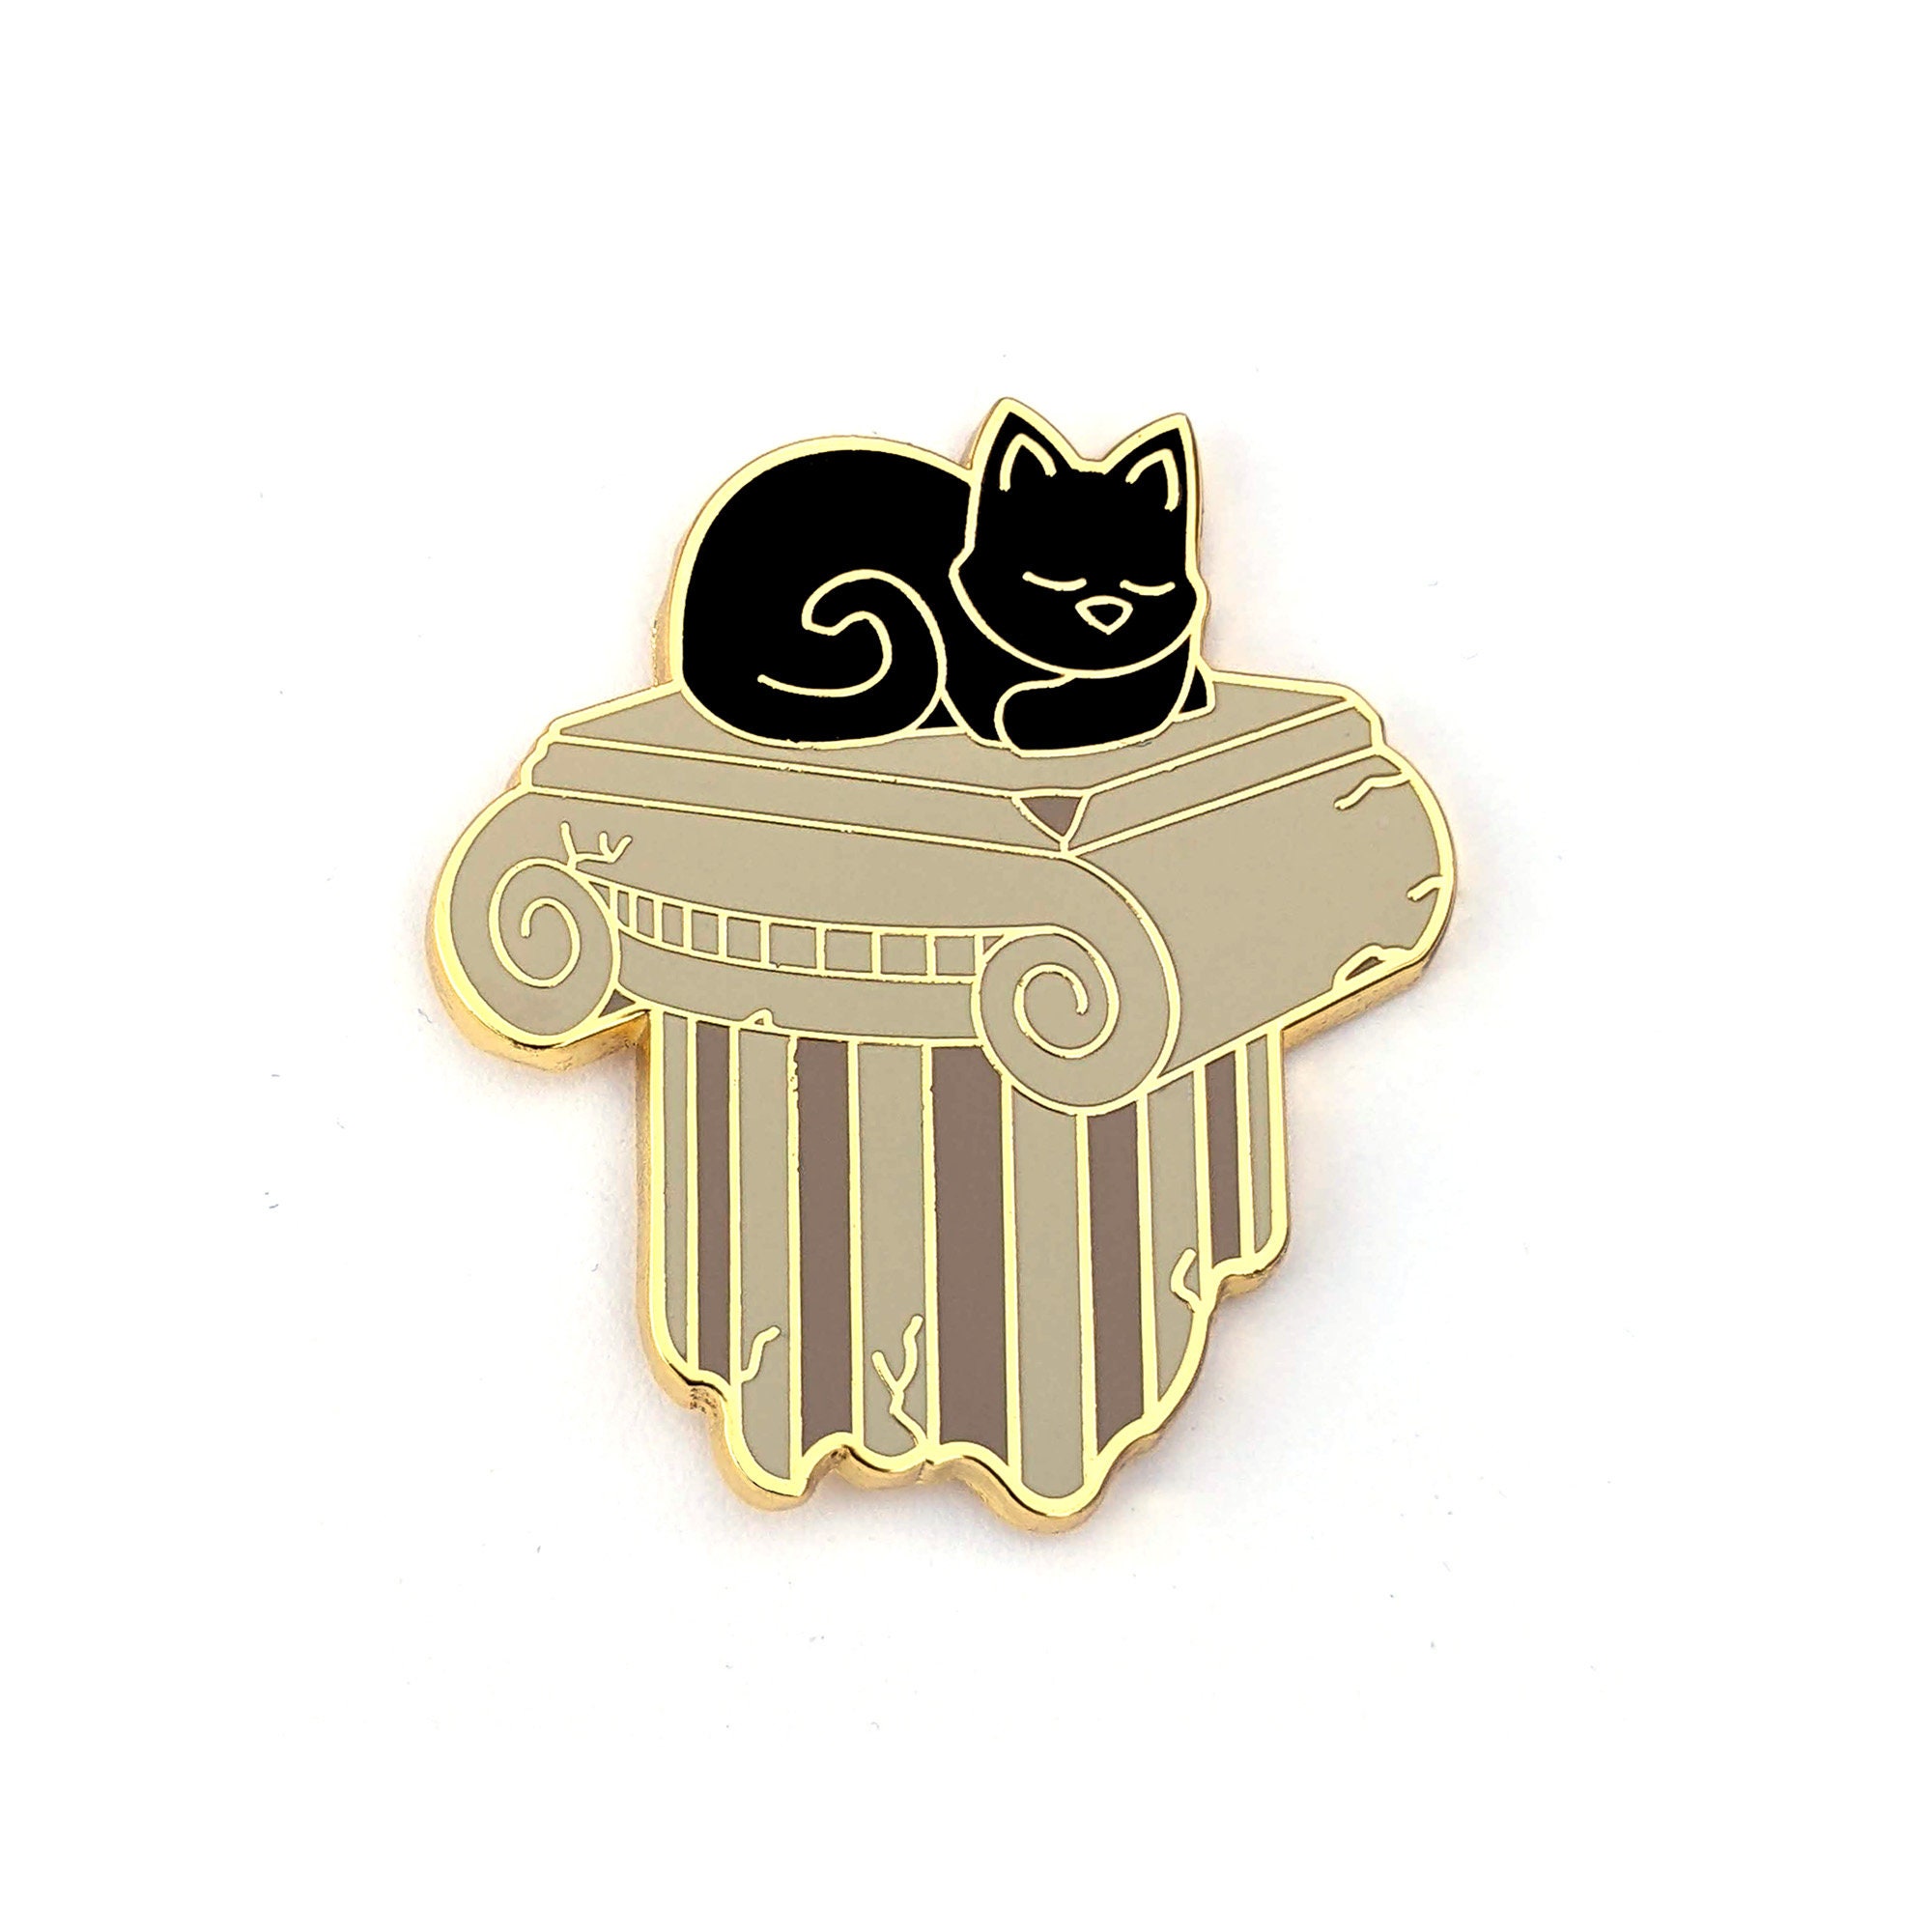  Giegxin 40 Pcs Black Cat Enamel Pins Bulk Cute Cat Brooches  Lapel Pins Christmas Gift Pins Valentine's Day Gift Pins Gothic Black Cat  Backpack Pins for Clothes Bags Accessories Gifts 